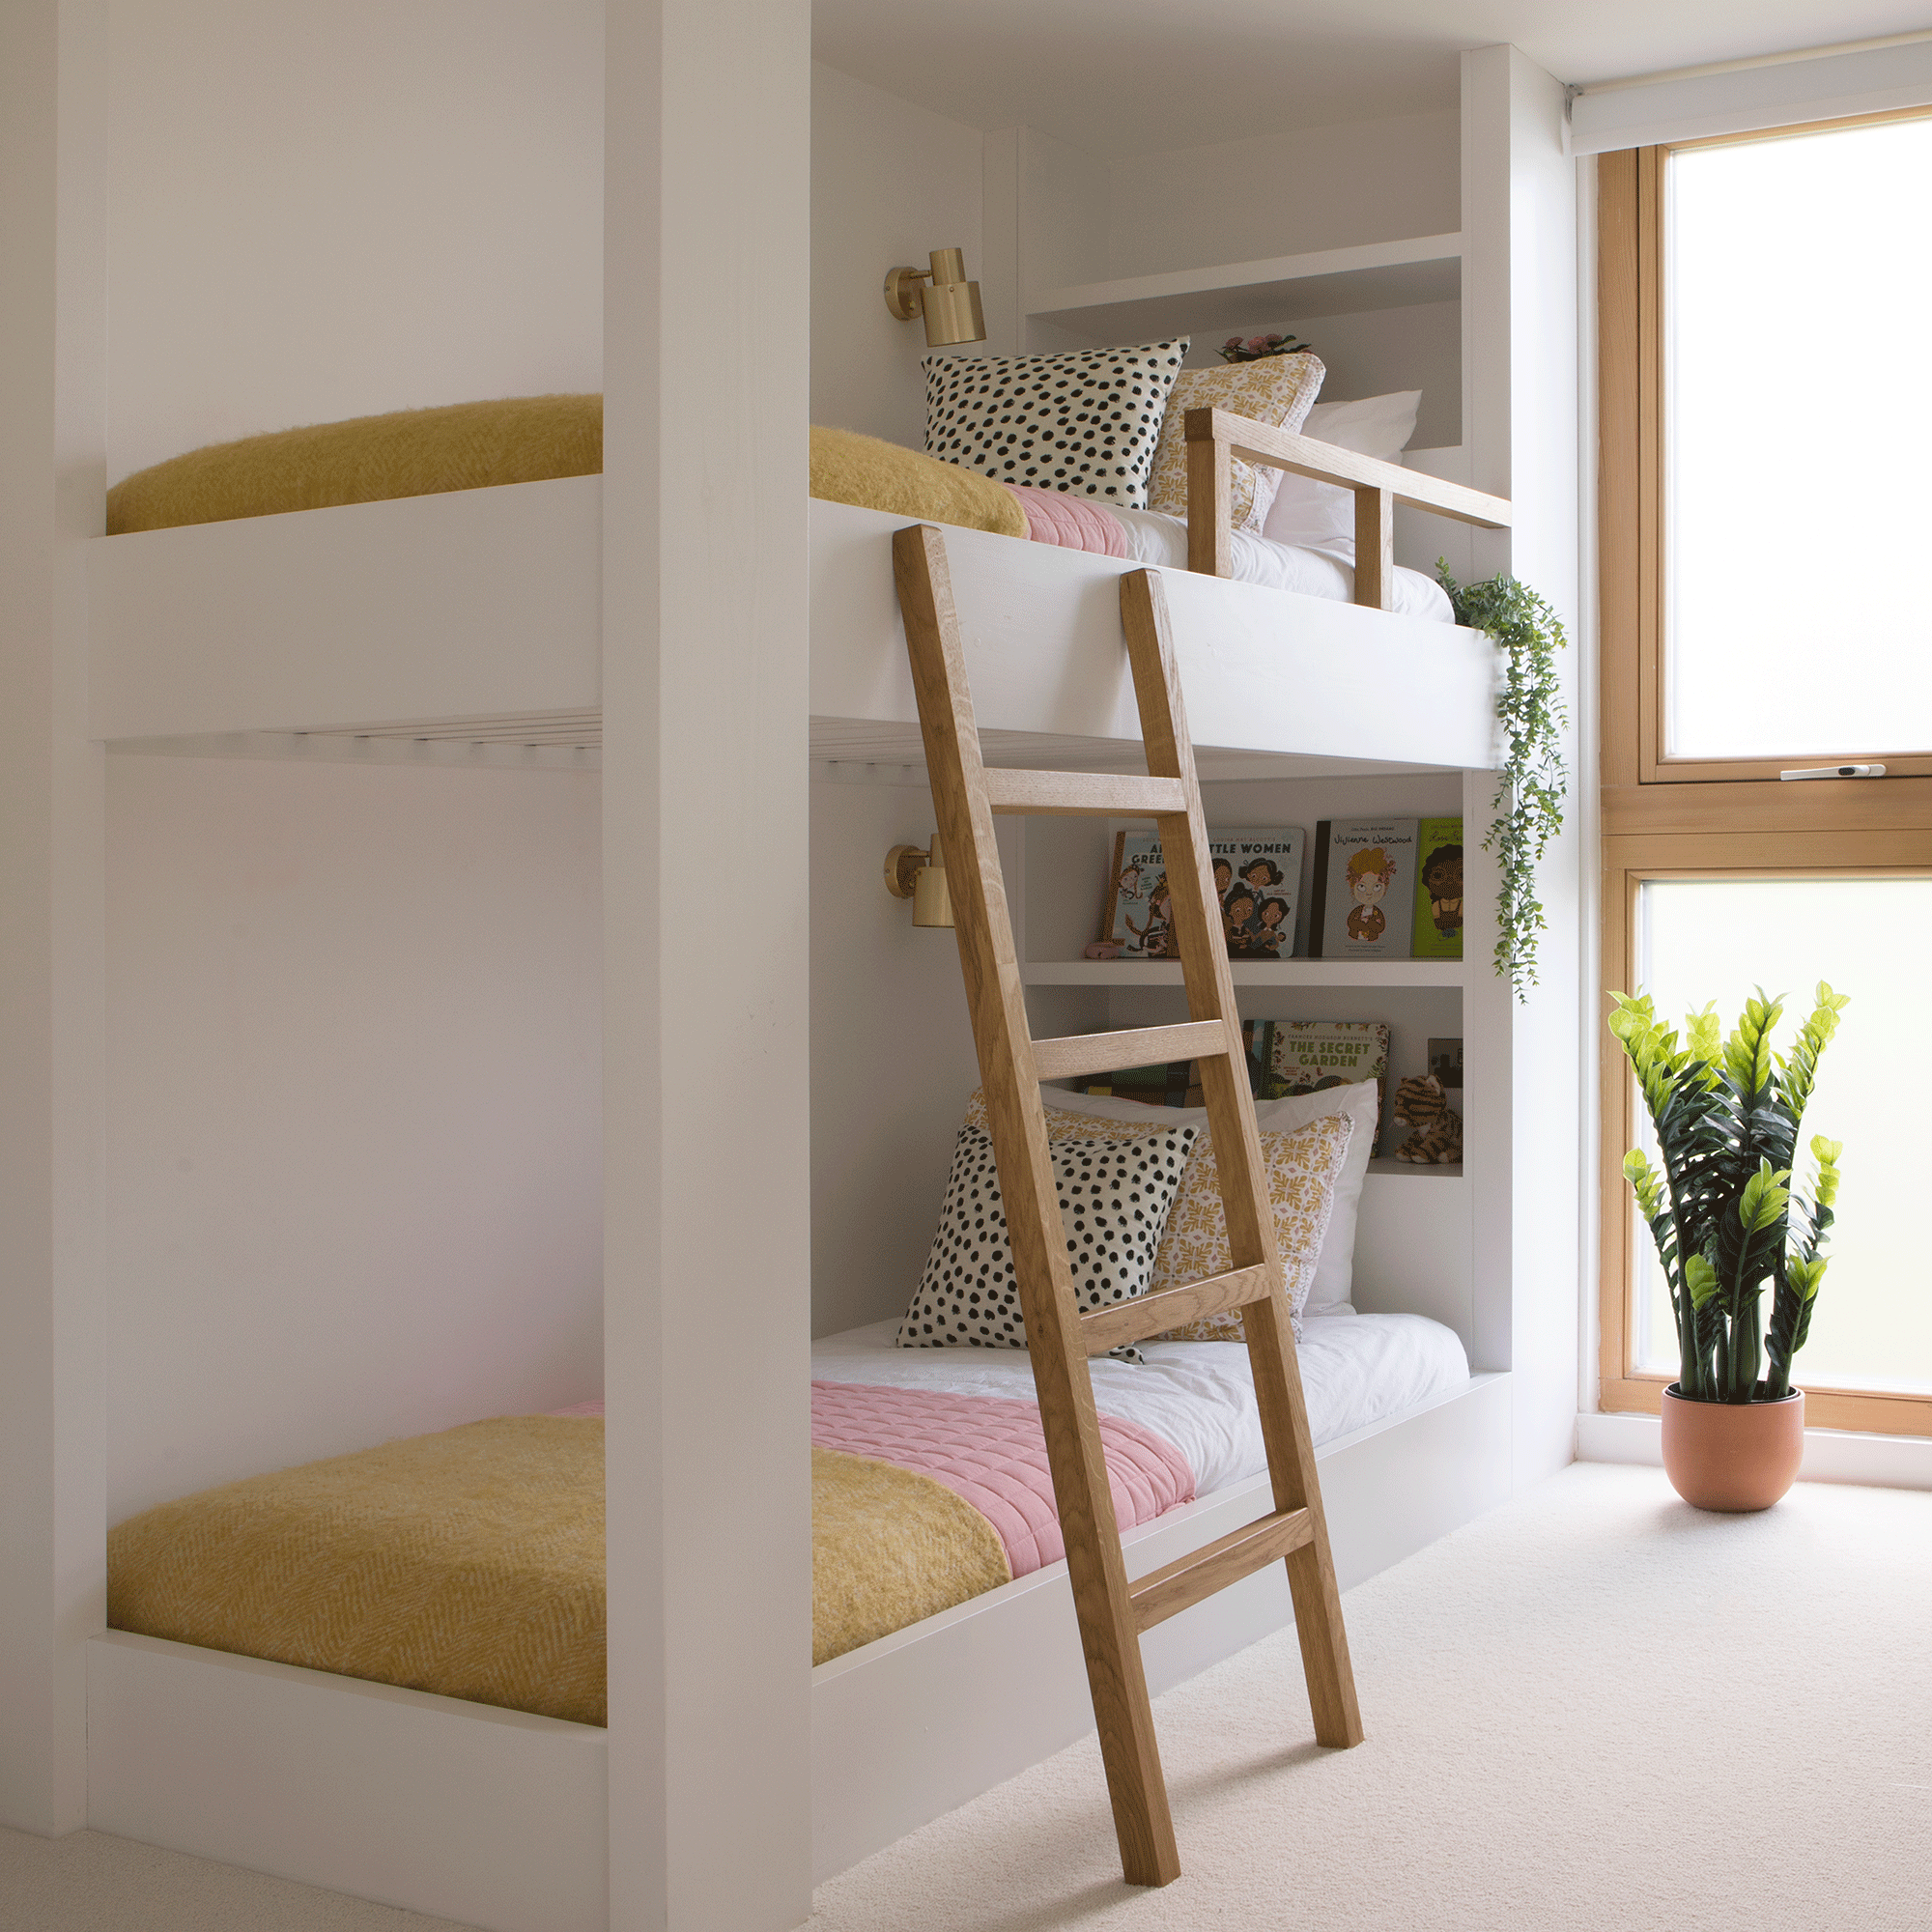 Bunk bed in white room with built in step ladder